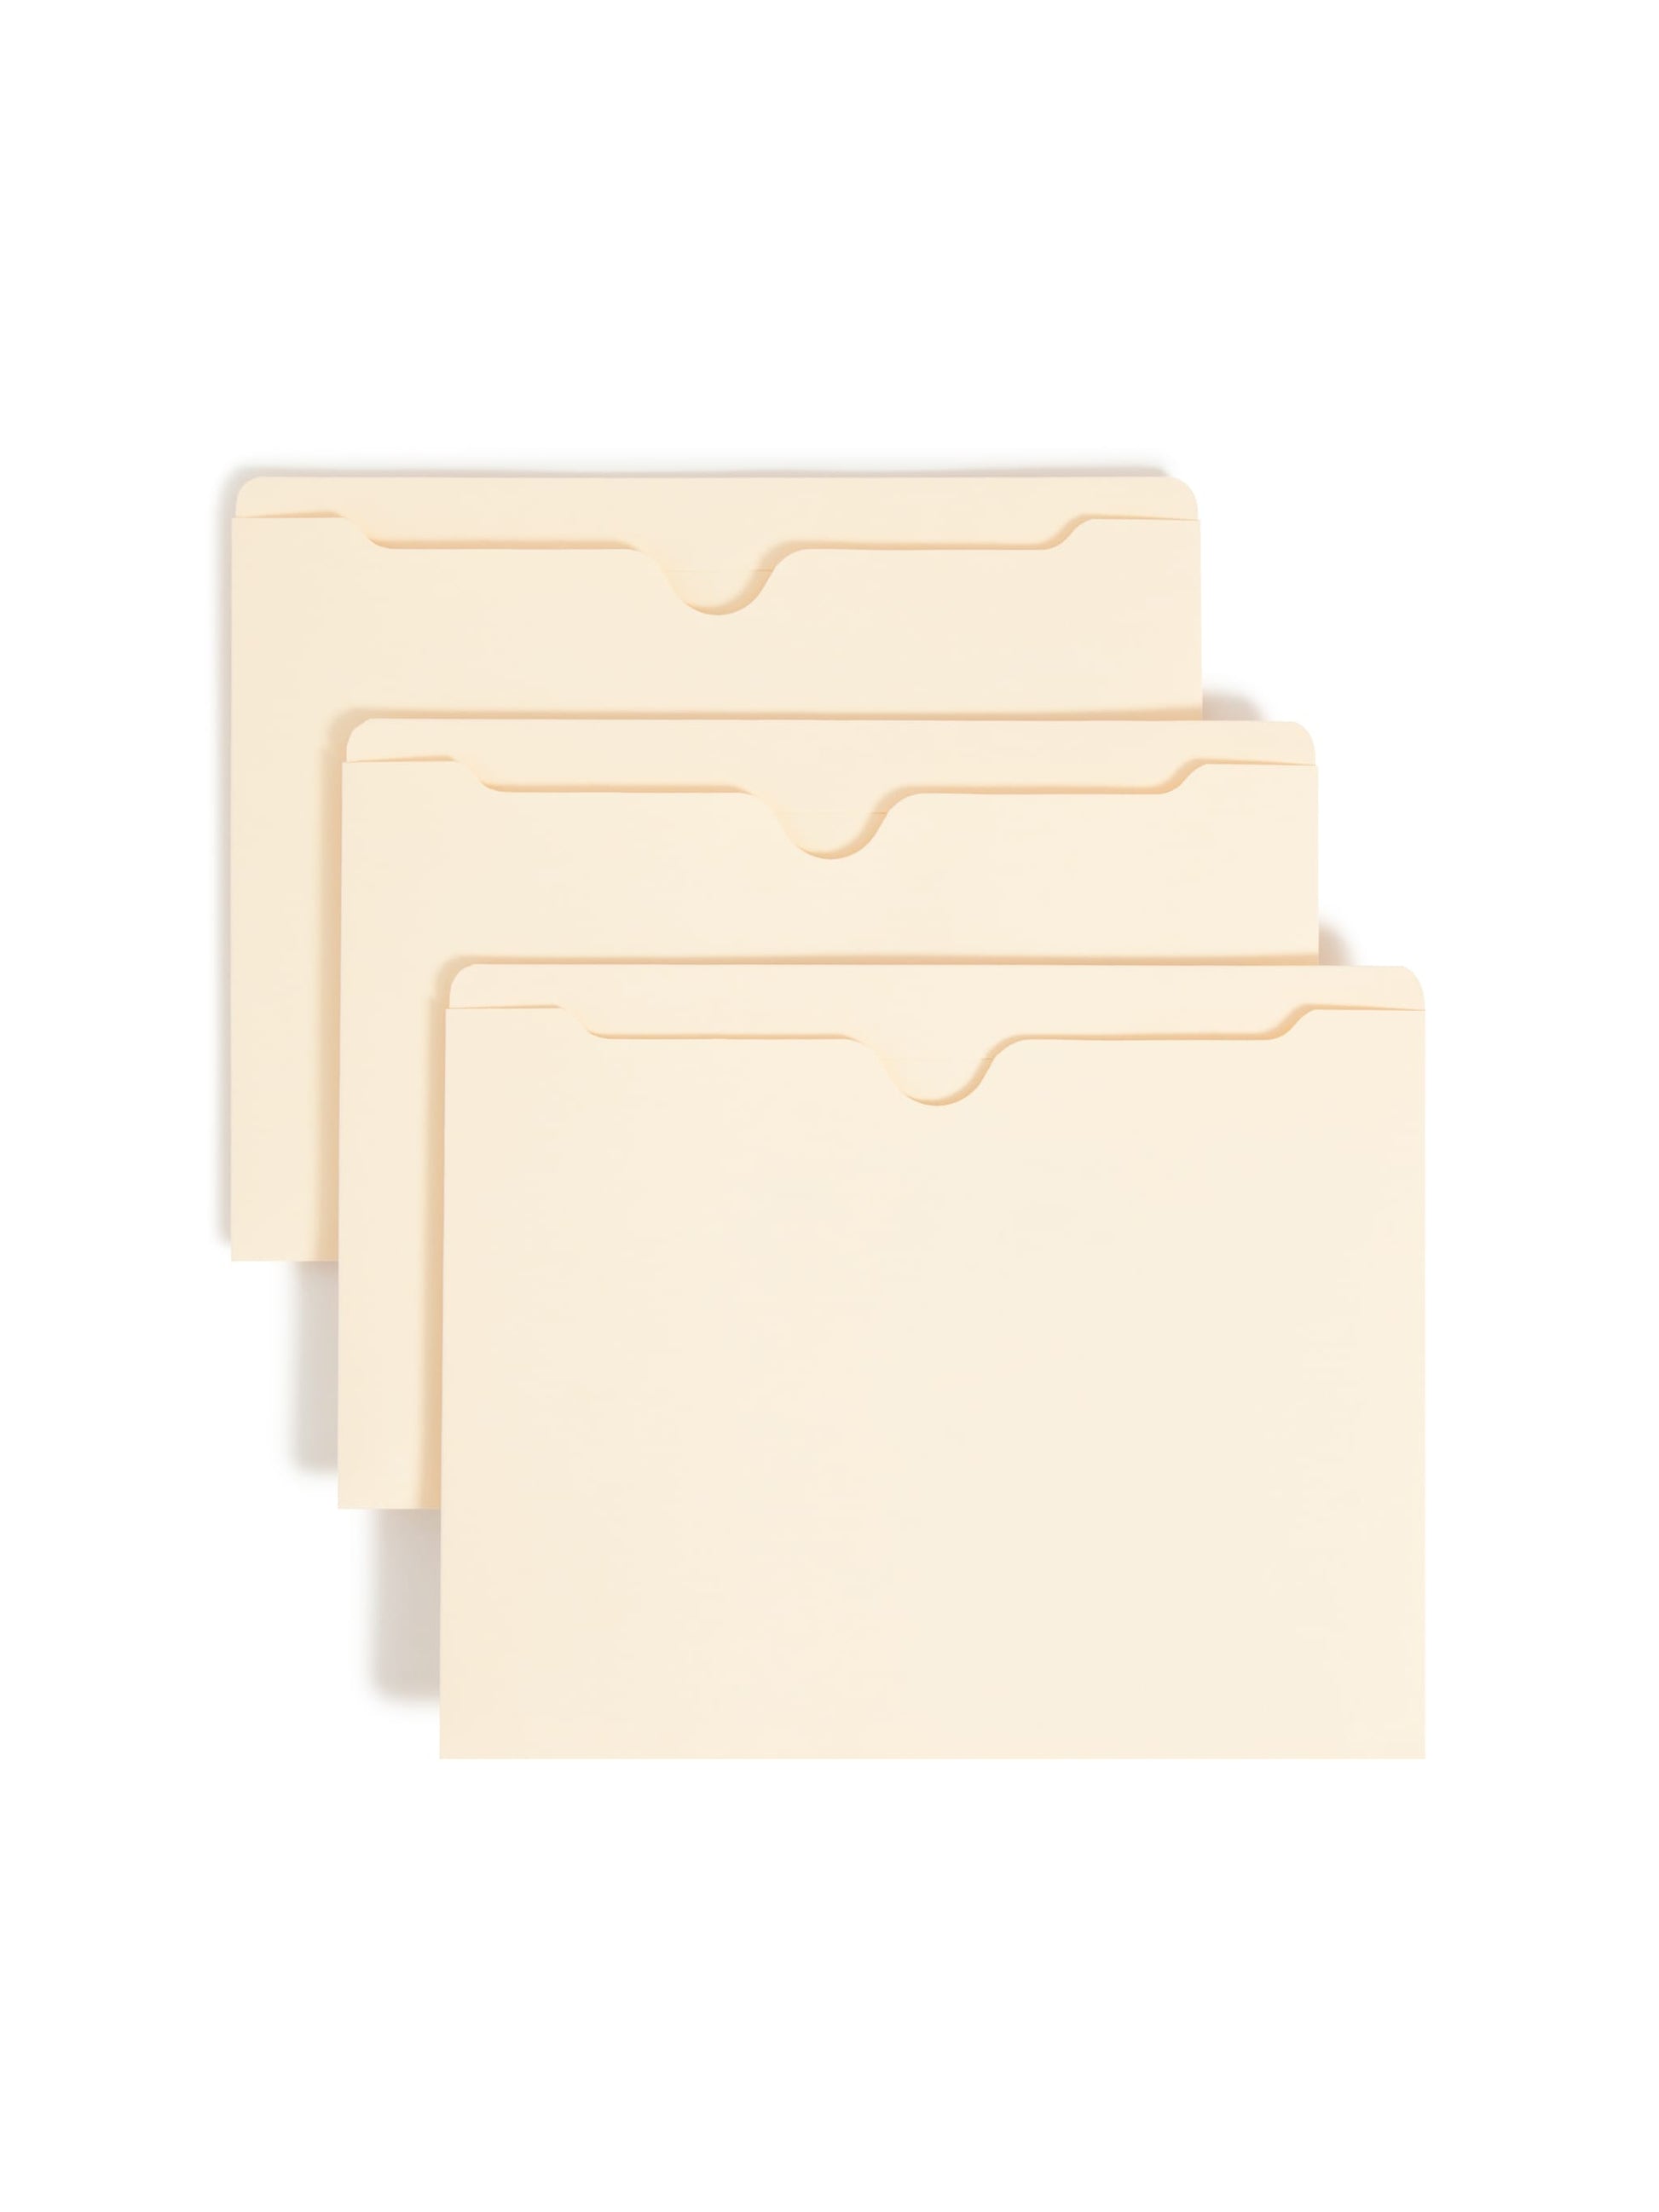 File Jackets, Flat-No Expansion, Straight-Cut Reinforced Tab, Manila Color, Letter Size, Set of 100, 30086486755000